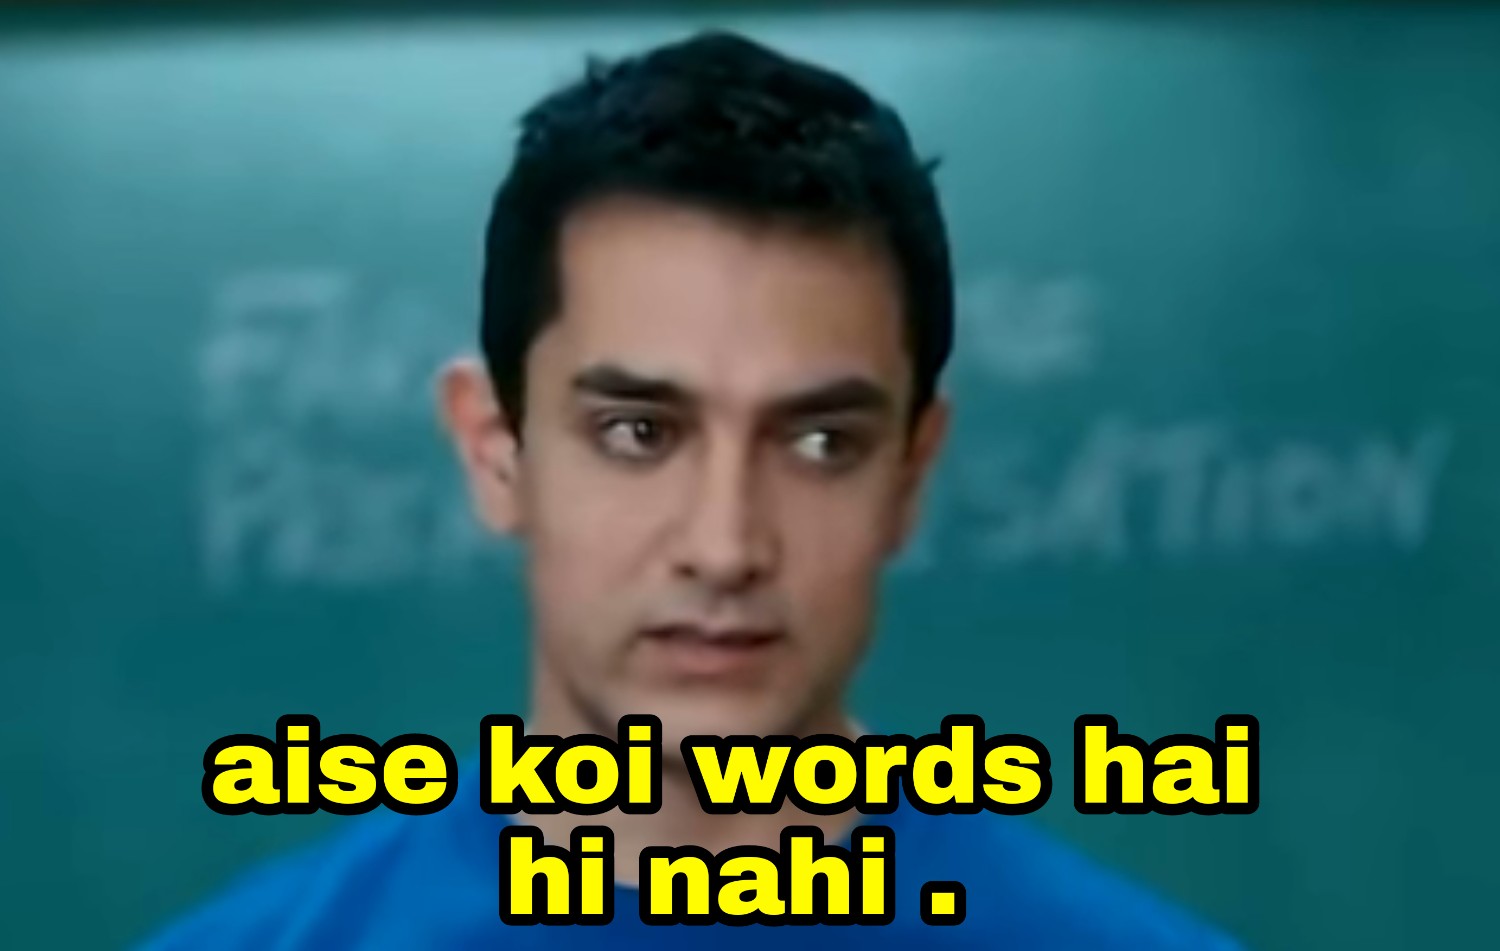 23 Memes From '3 Idiots' Inspired By Its Epic Scenes & Dialogues